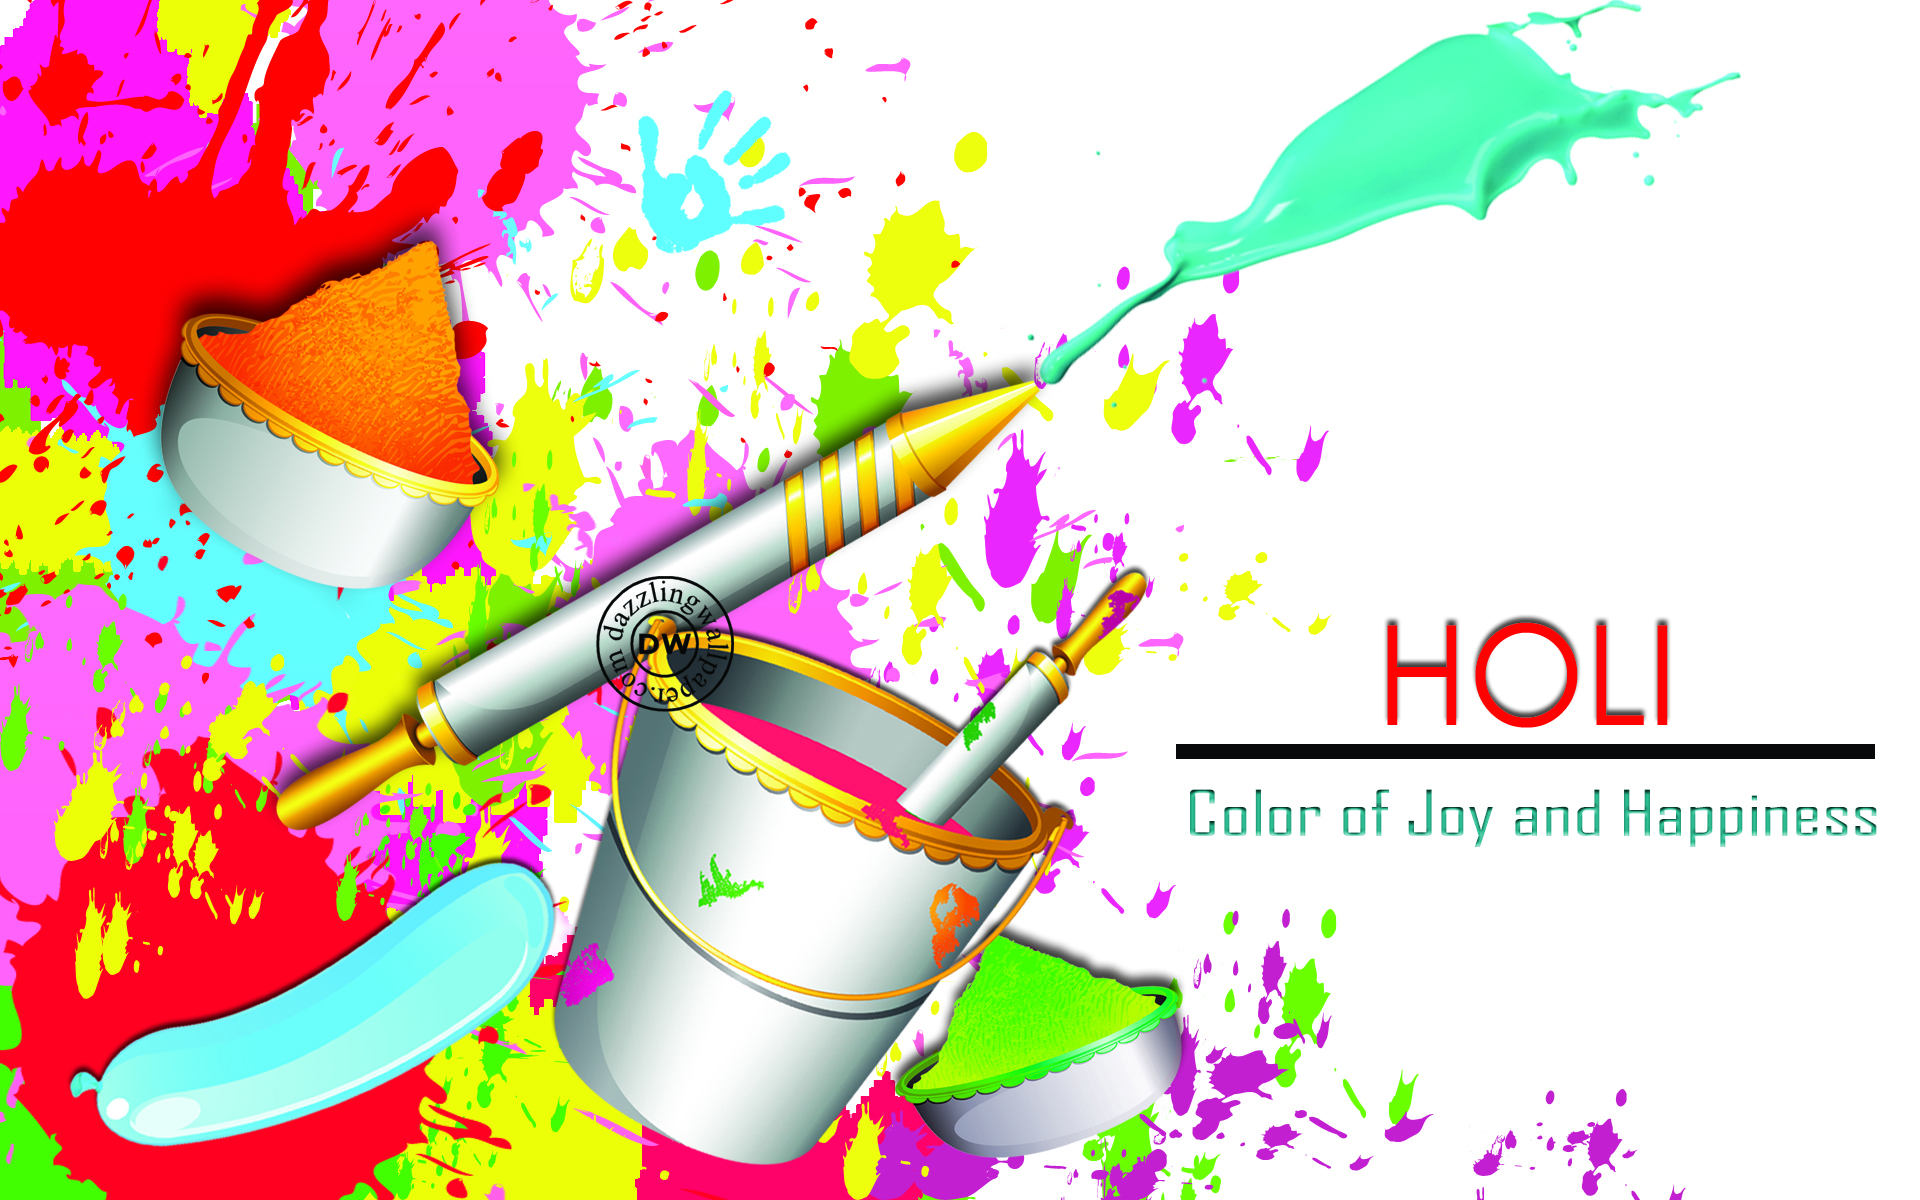 Holi 2017 Color Of Joy And Happiness